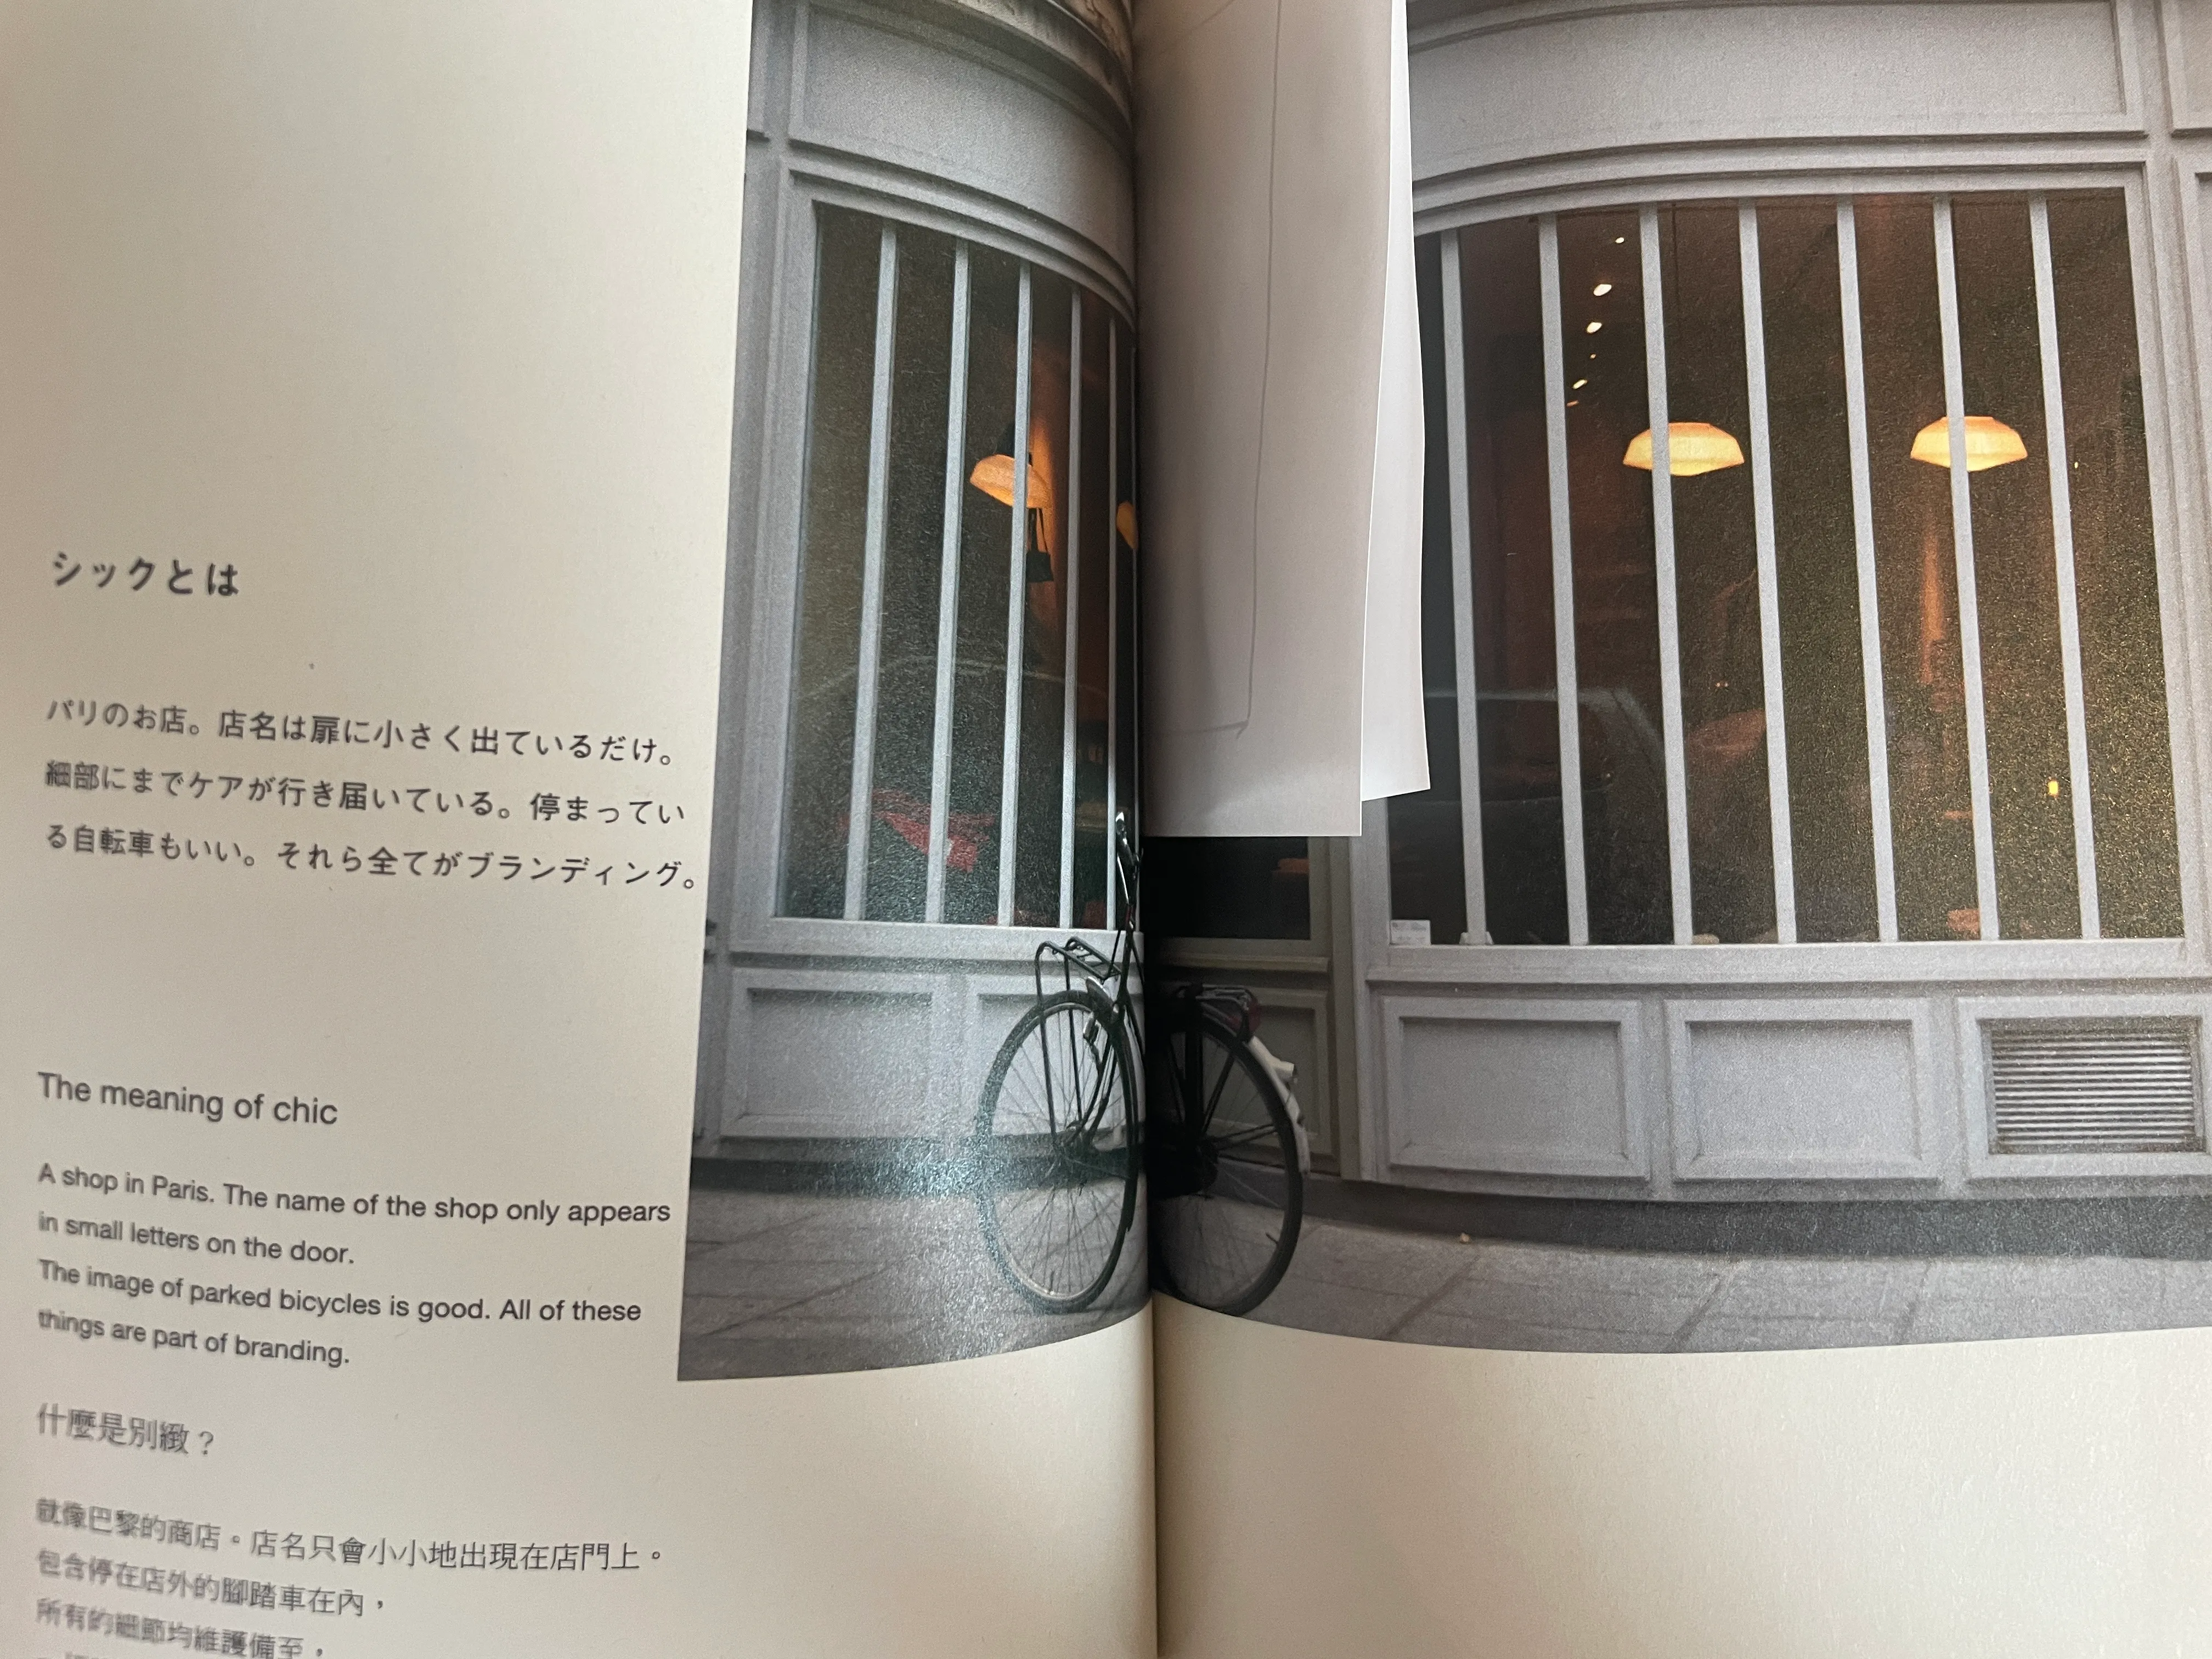 A photograph of favorite moment from Found Muji. A chic storefront in France.